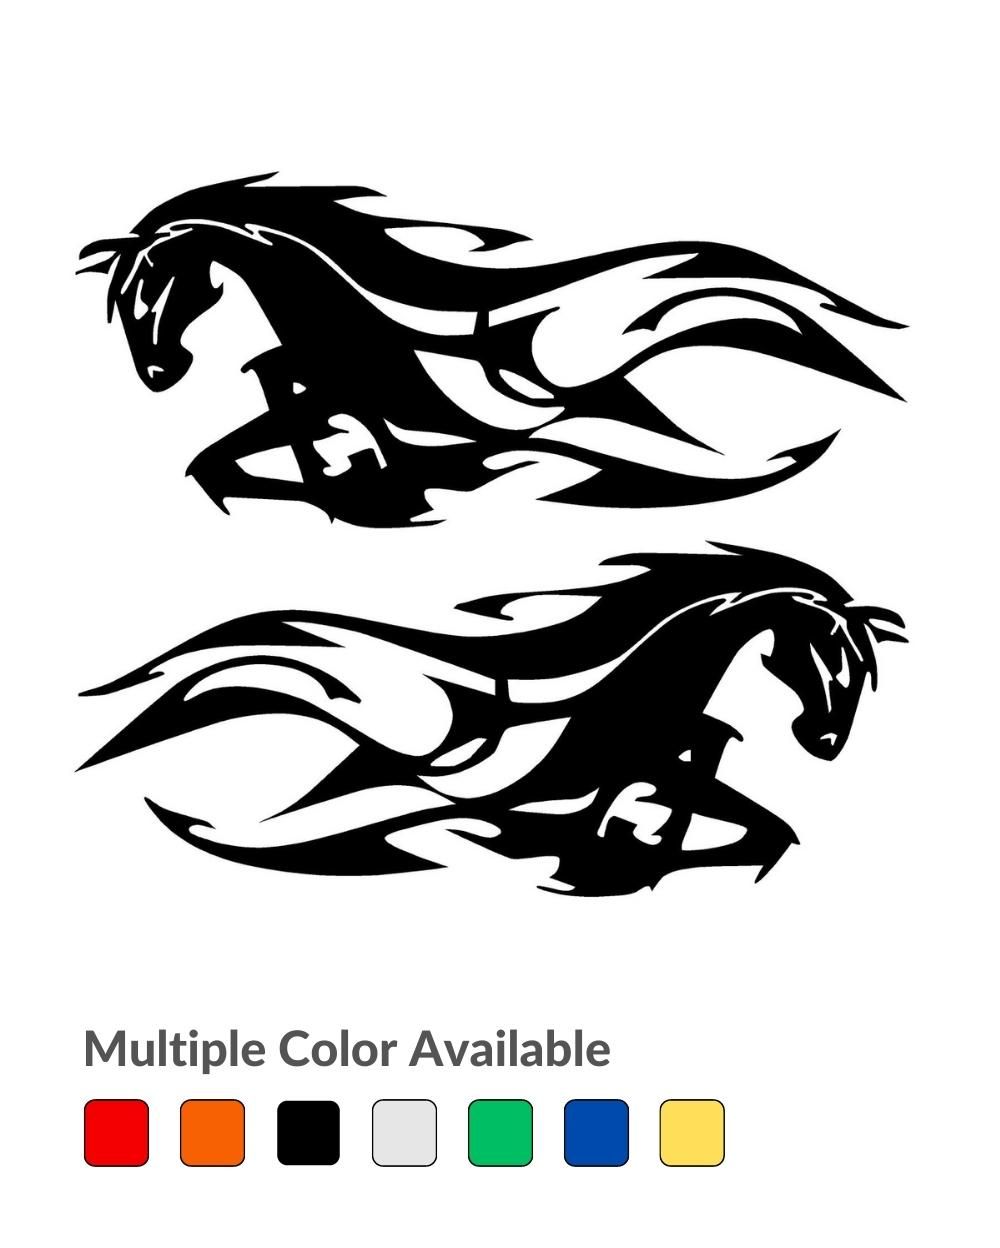 Create a stylized image of a horse riding a bike with strong contrasts  between black and white